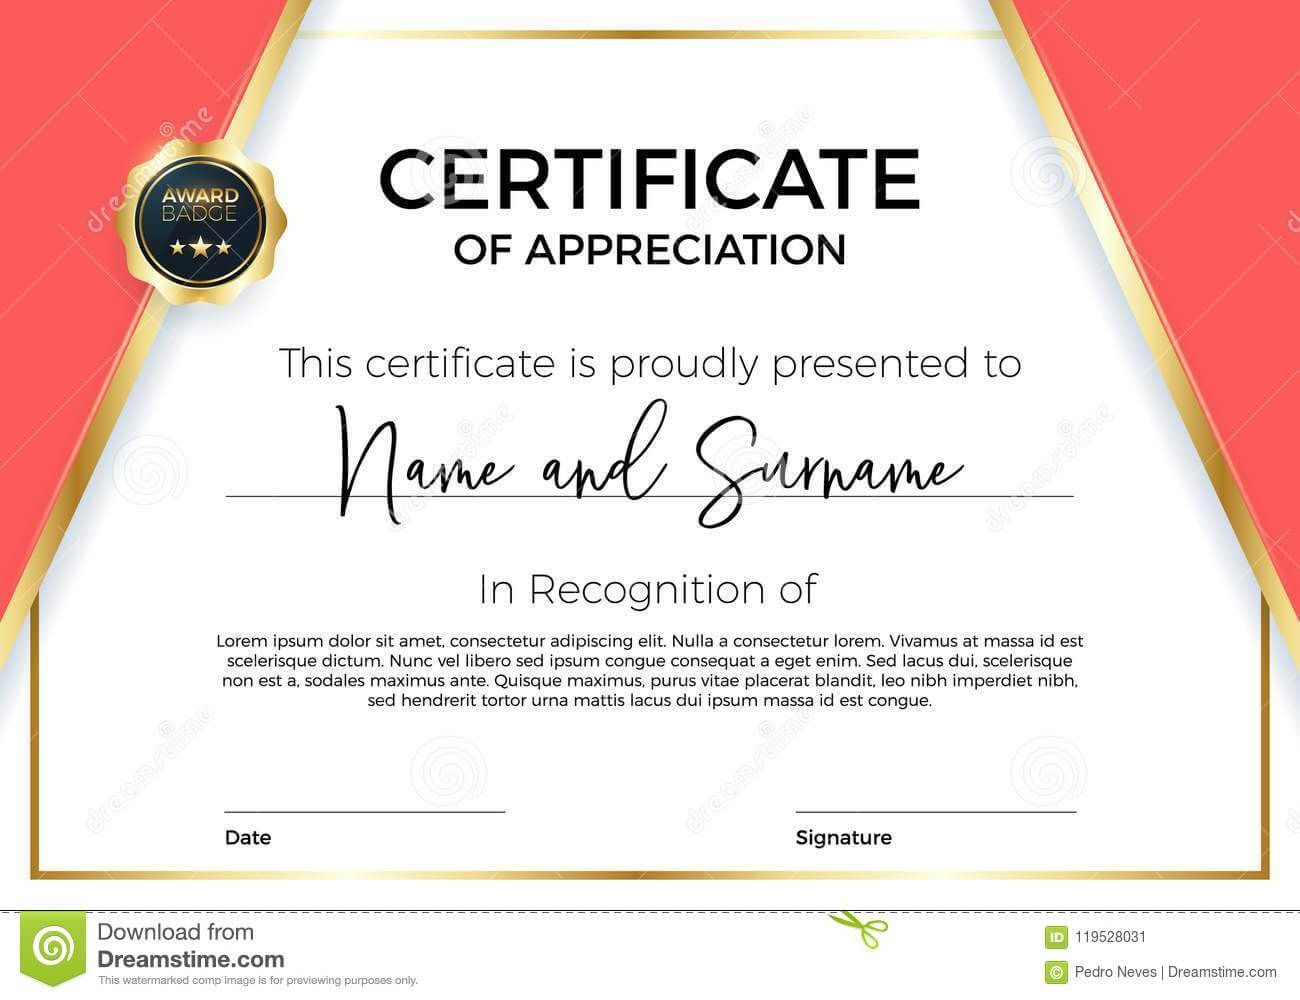 Certificate Of Appreciation Or Achievement With Award Badge Intended For Template For Certificate Of Award